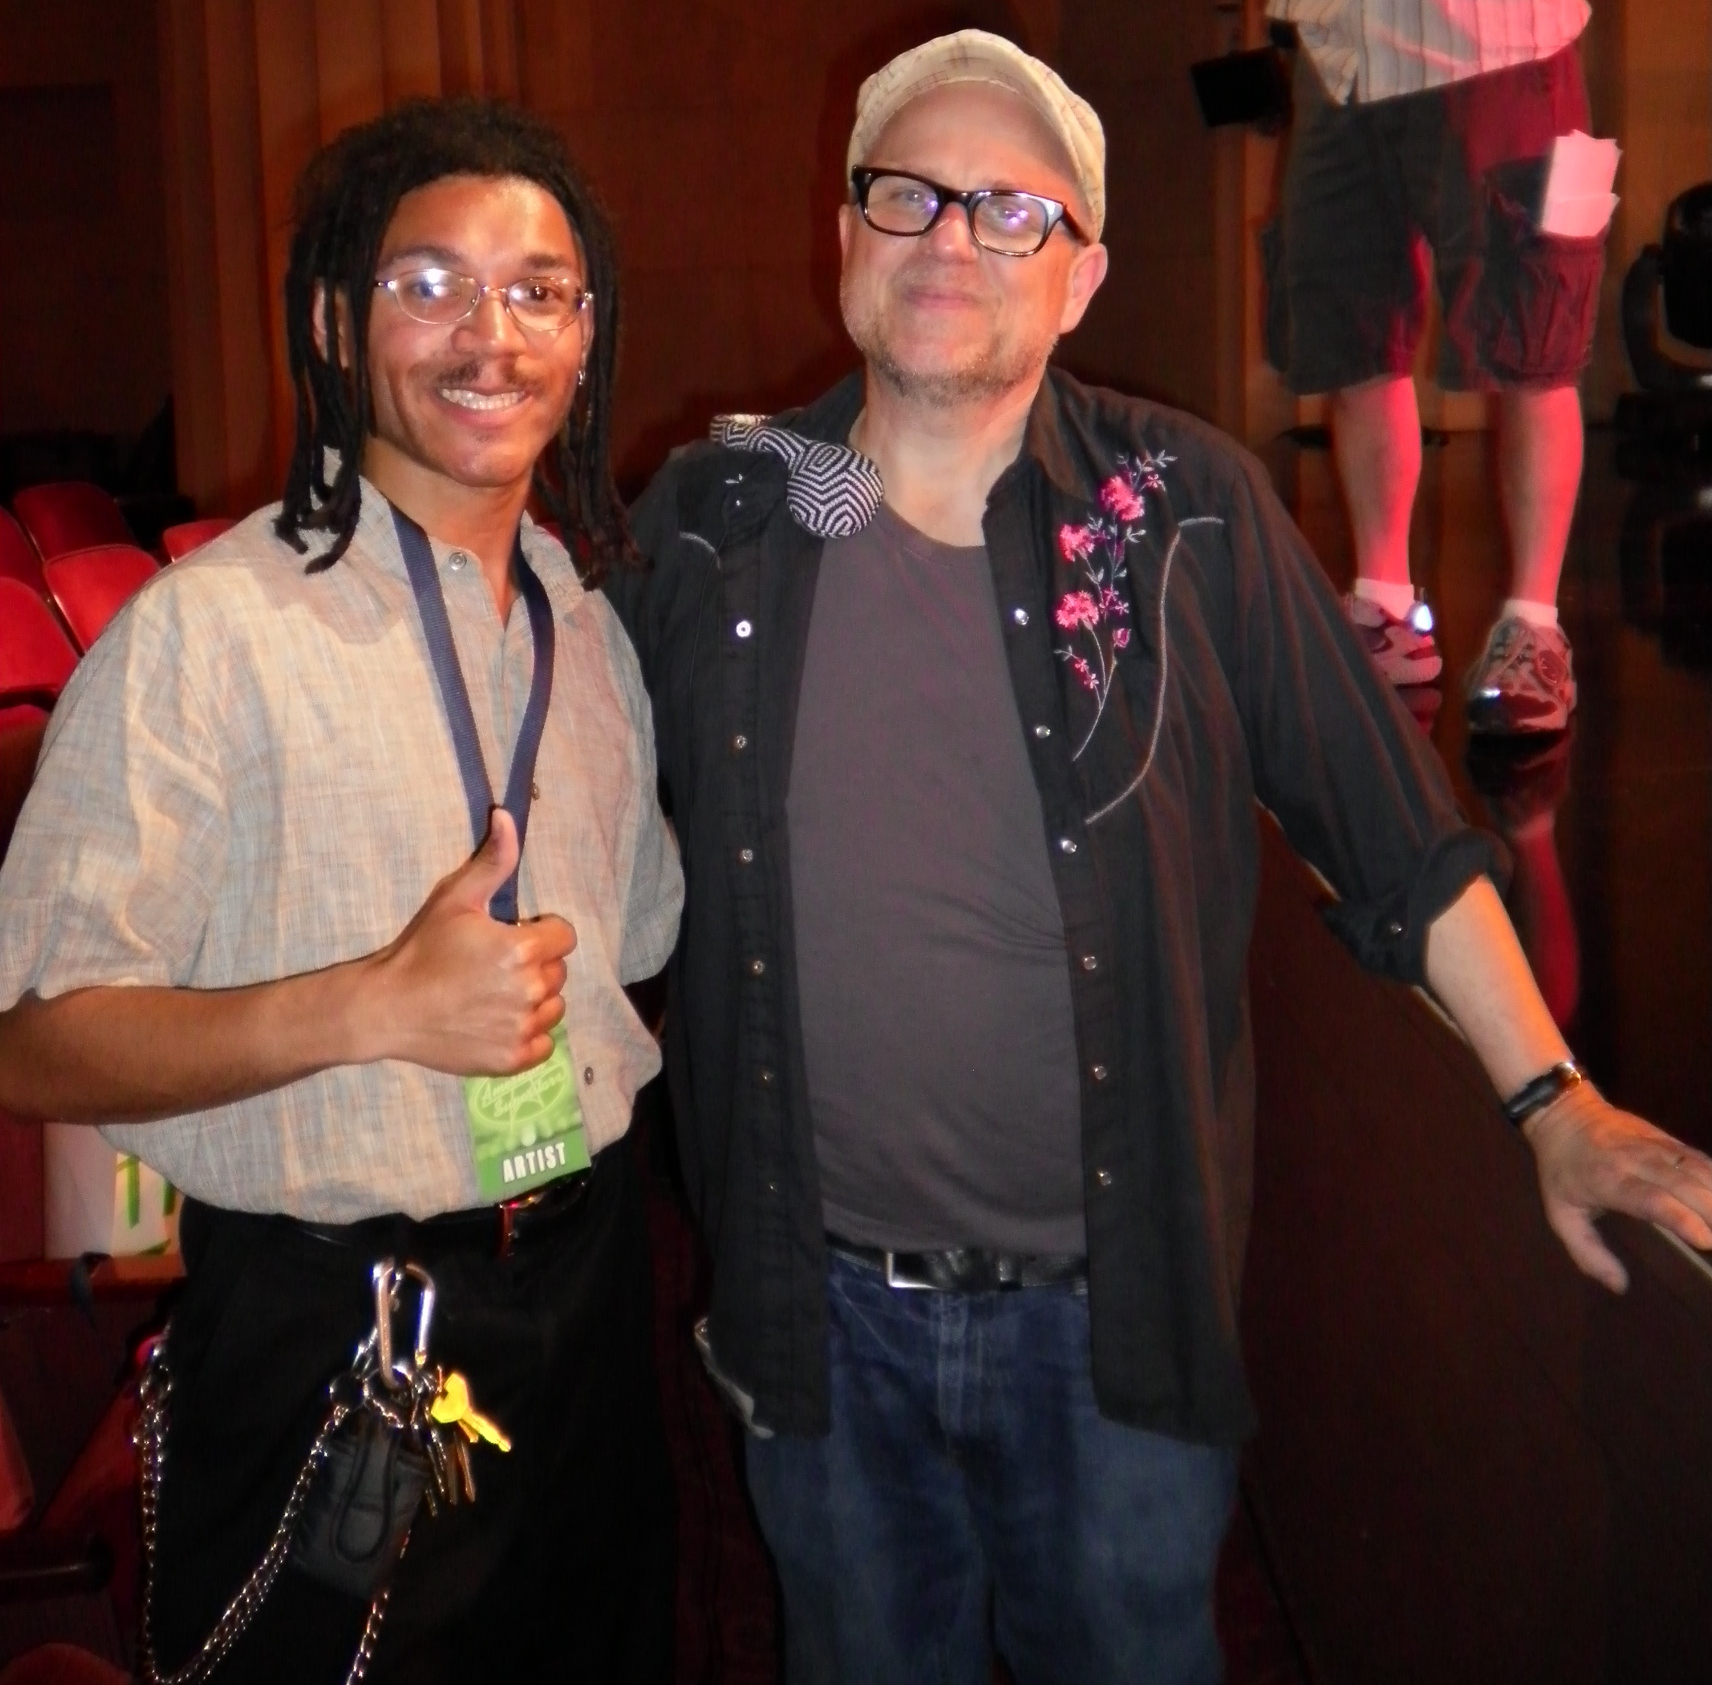 Me and Bobcat Goldthwait at Godbless America American Superstar shoot